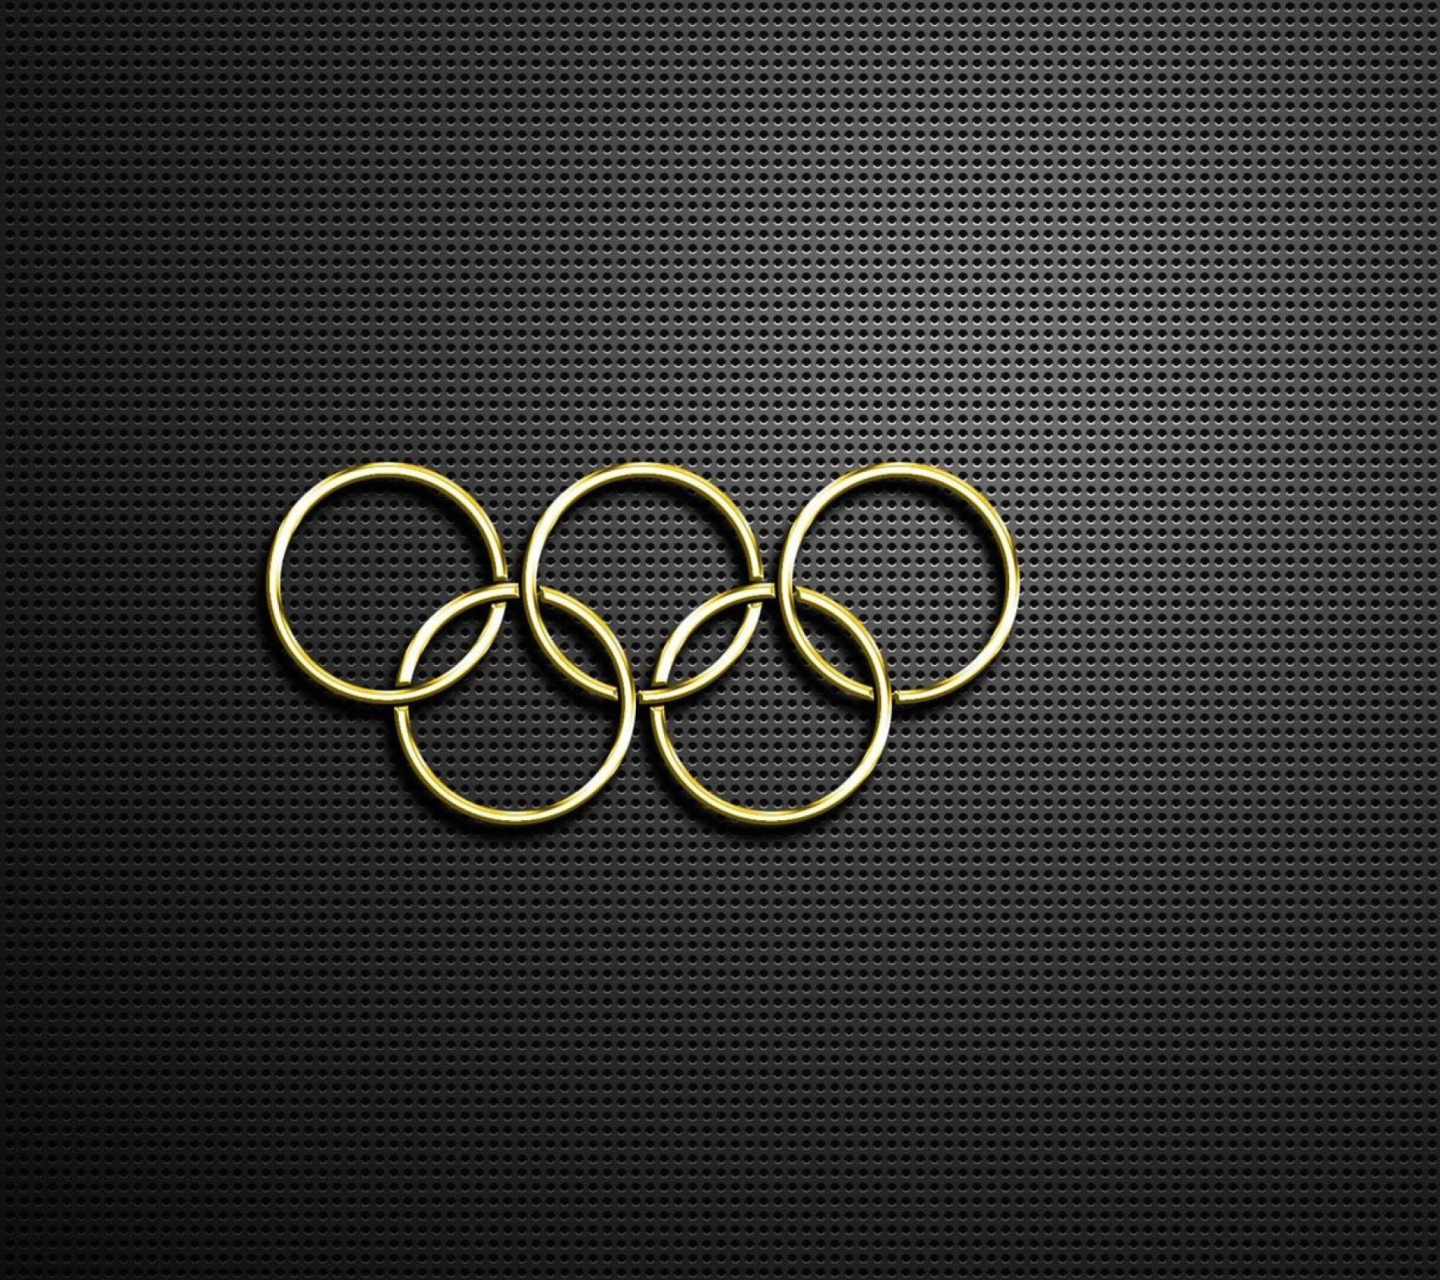 Olympic Games wallpaper 1440x1280